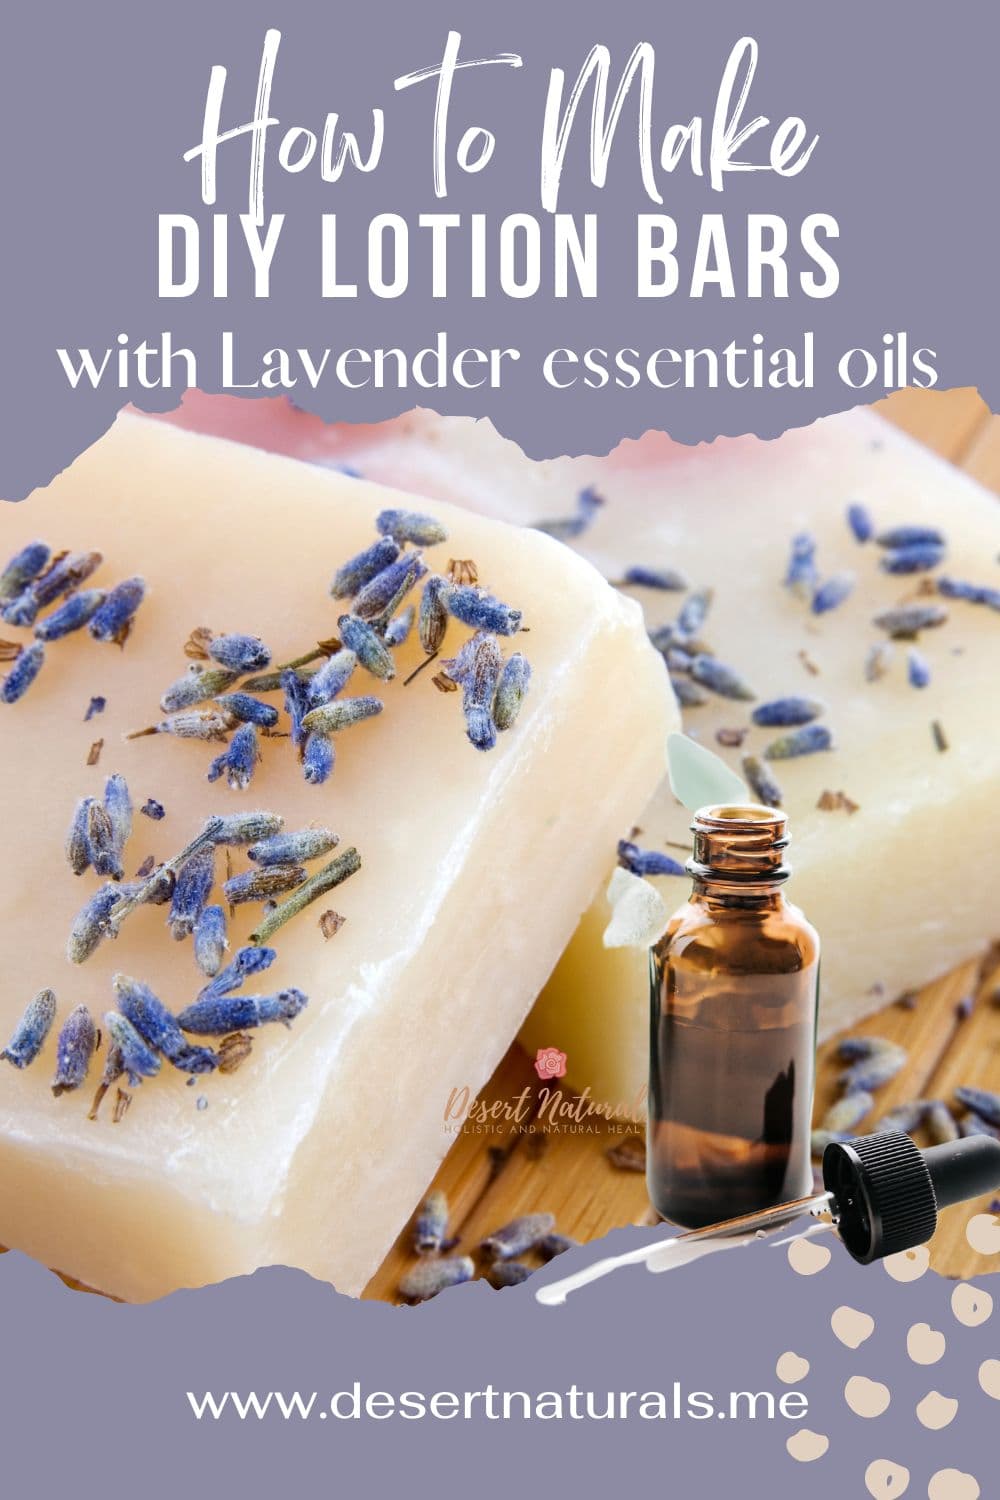 image of diy lotion bars with lavender and essential oil bottle and text